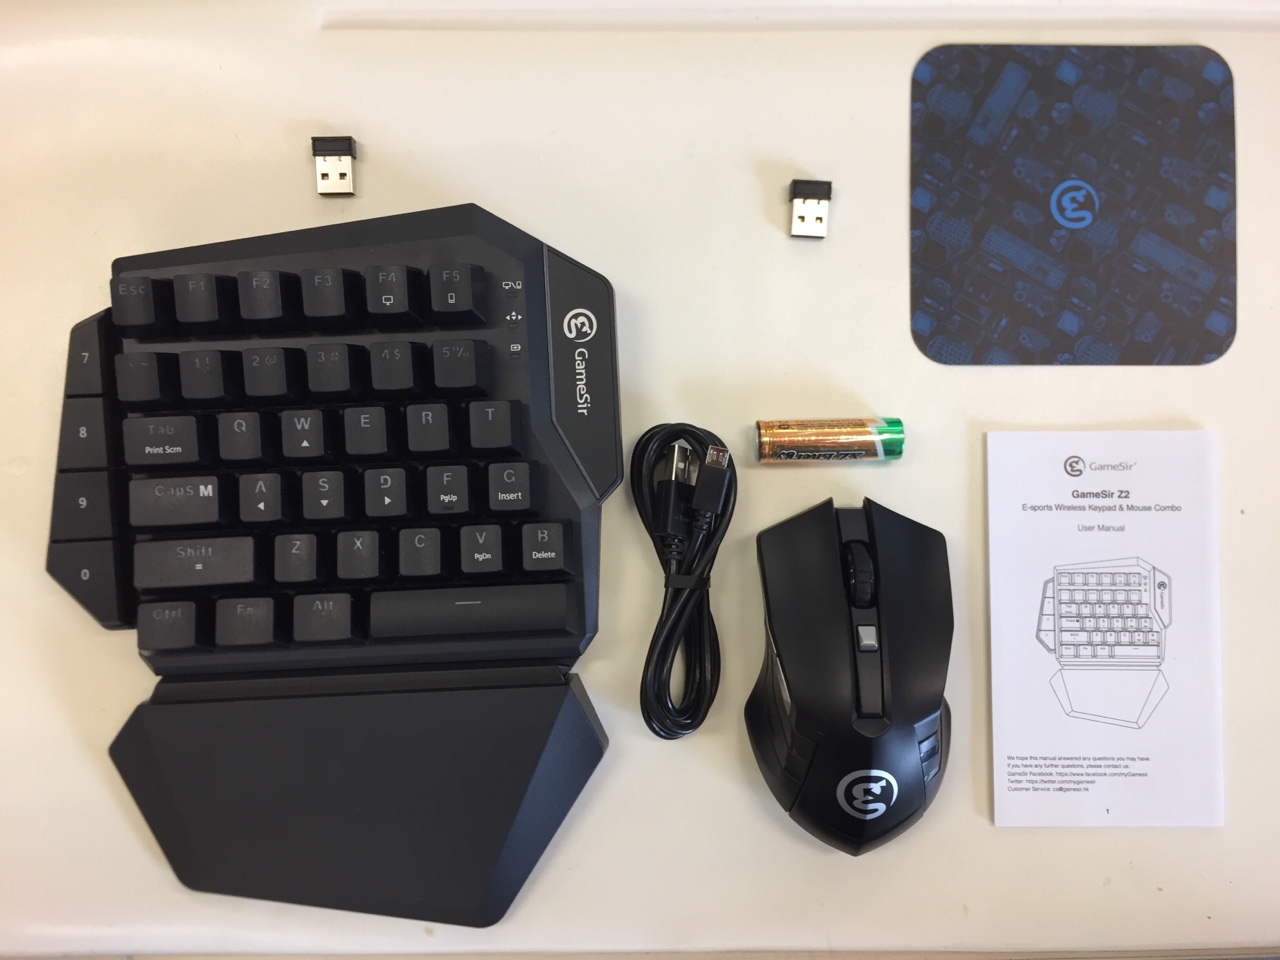 GameSir Z2 Wireless Gaming Keyboard And DPI Mouse One-hand e-sports keyboard HYH 